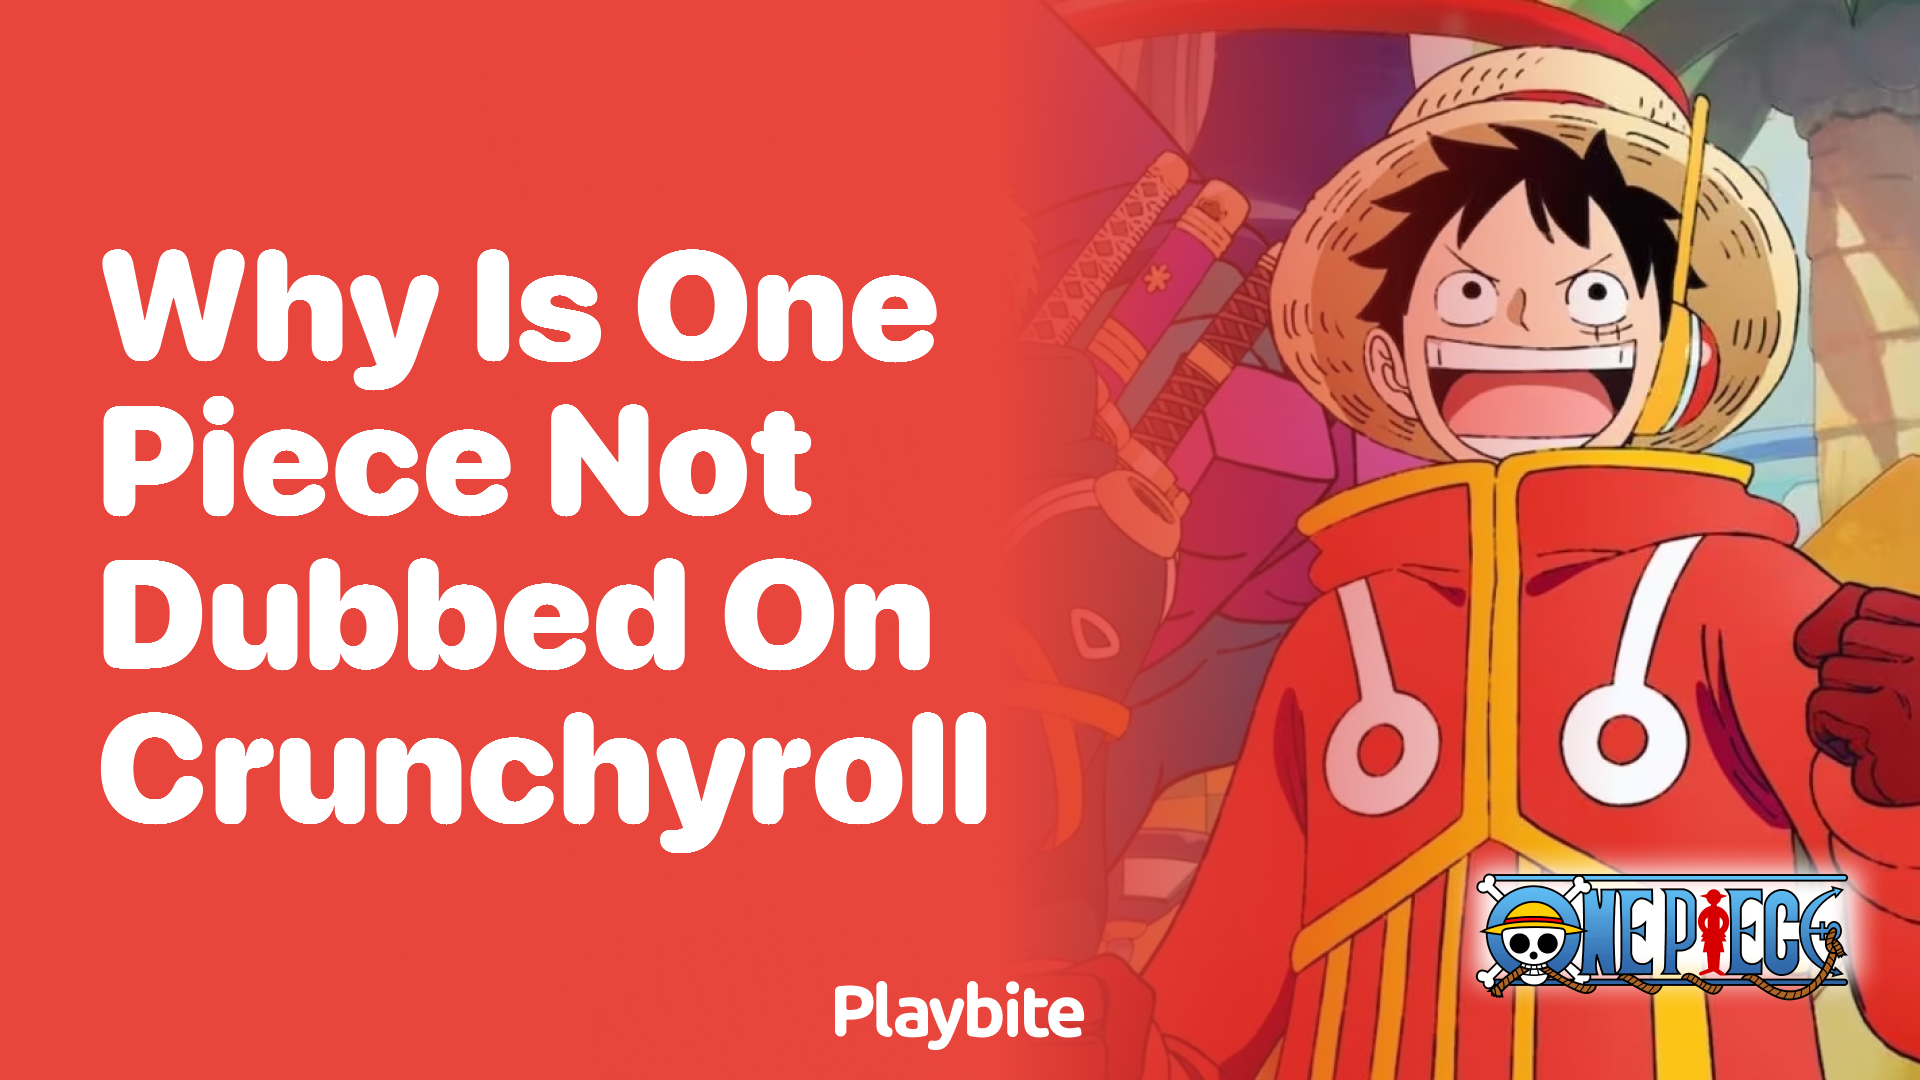 Why Is One Piece Not Dubbed on Crunchyroll?